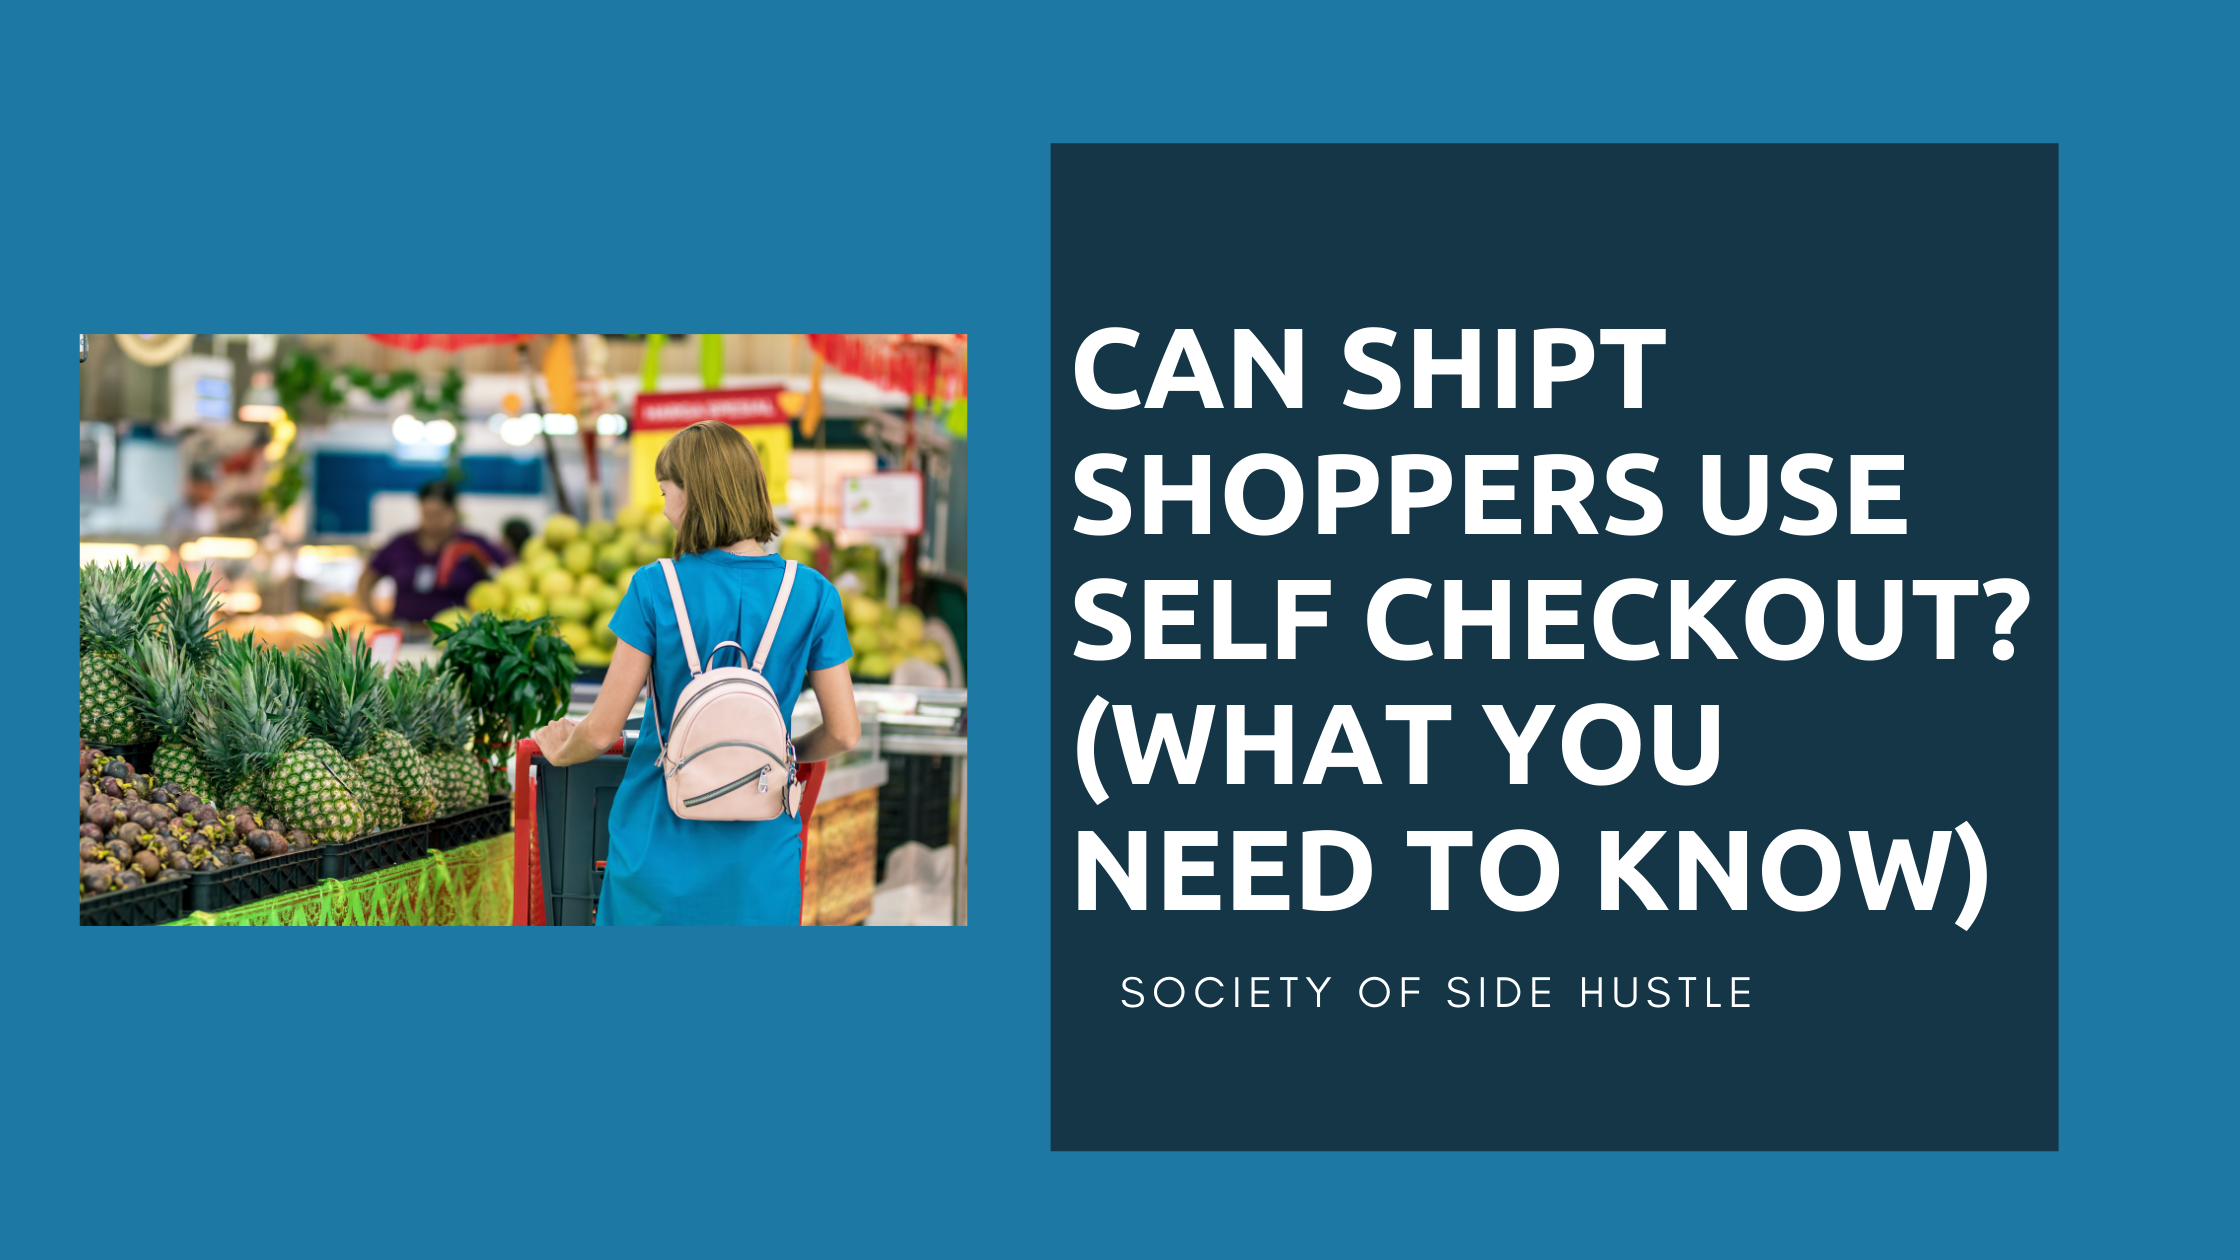 Can Shipt Shoppers Use Self Checkout? (What You Need To Know)